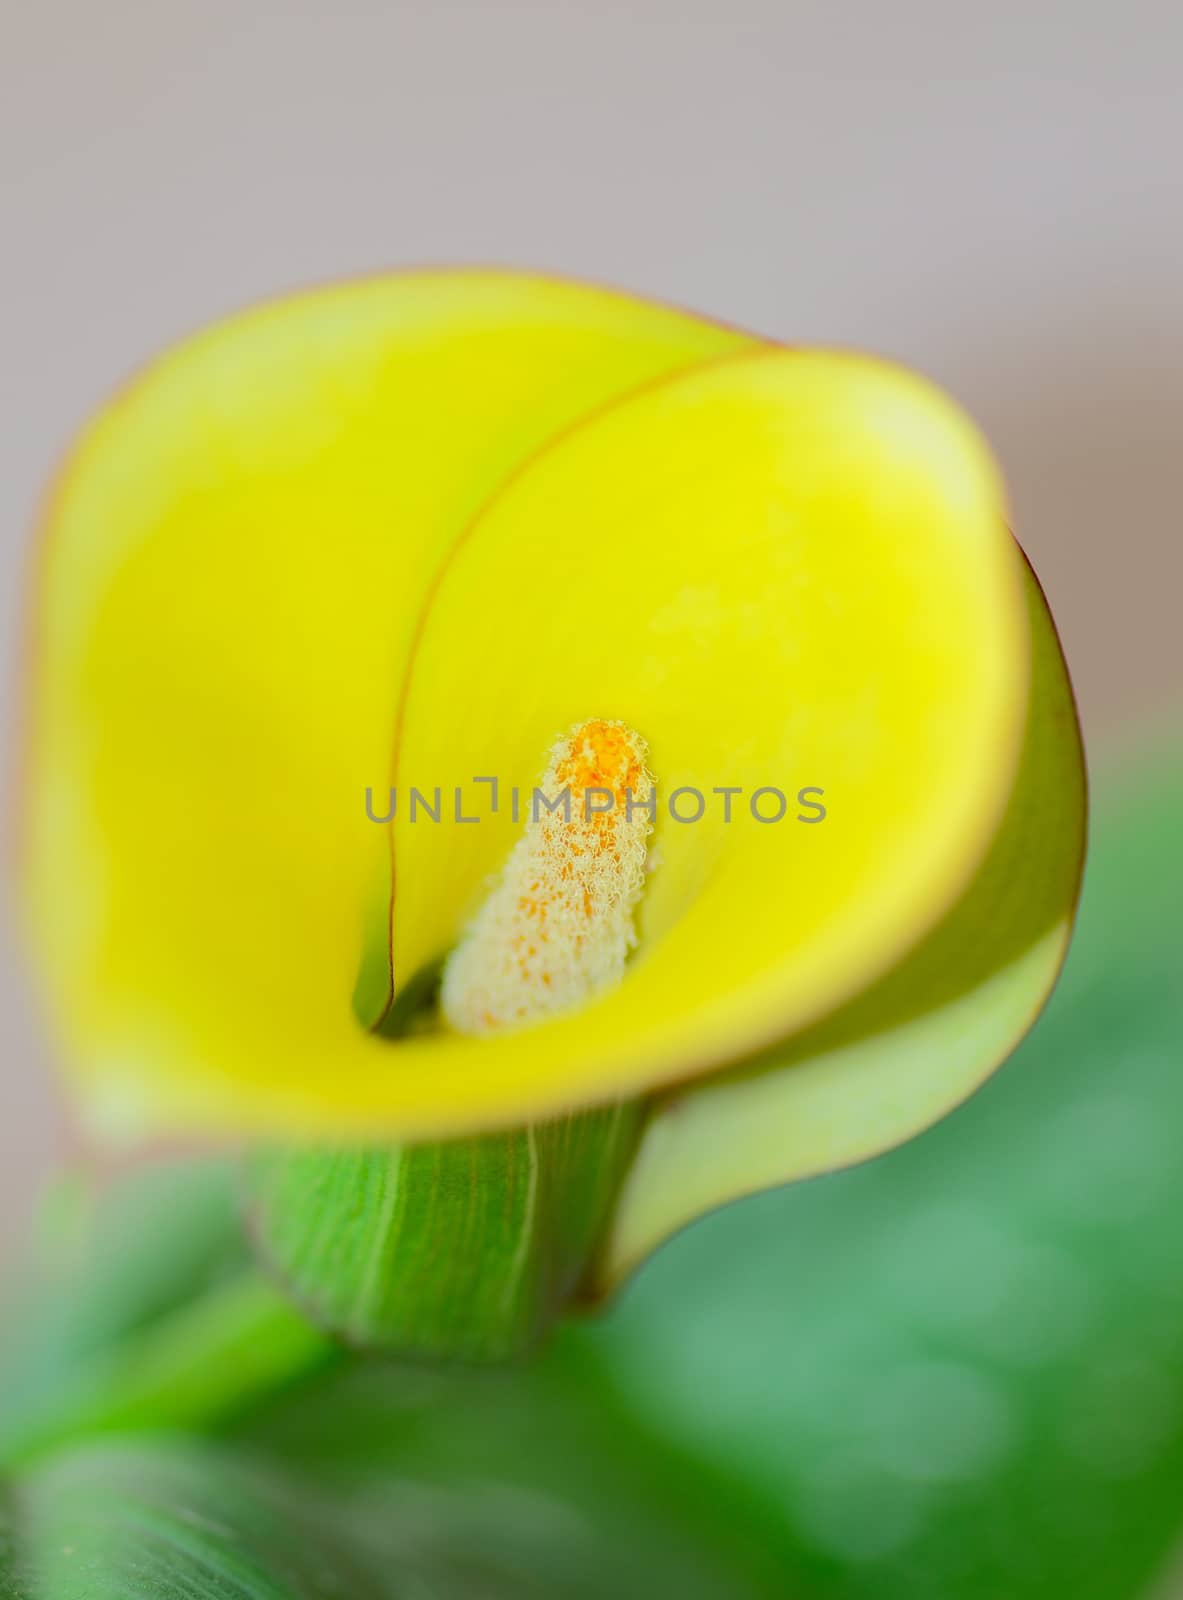 Beauty Yellow Calla Lily closeup. Focus on Pistil with Pollen